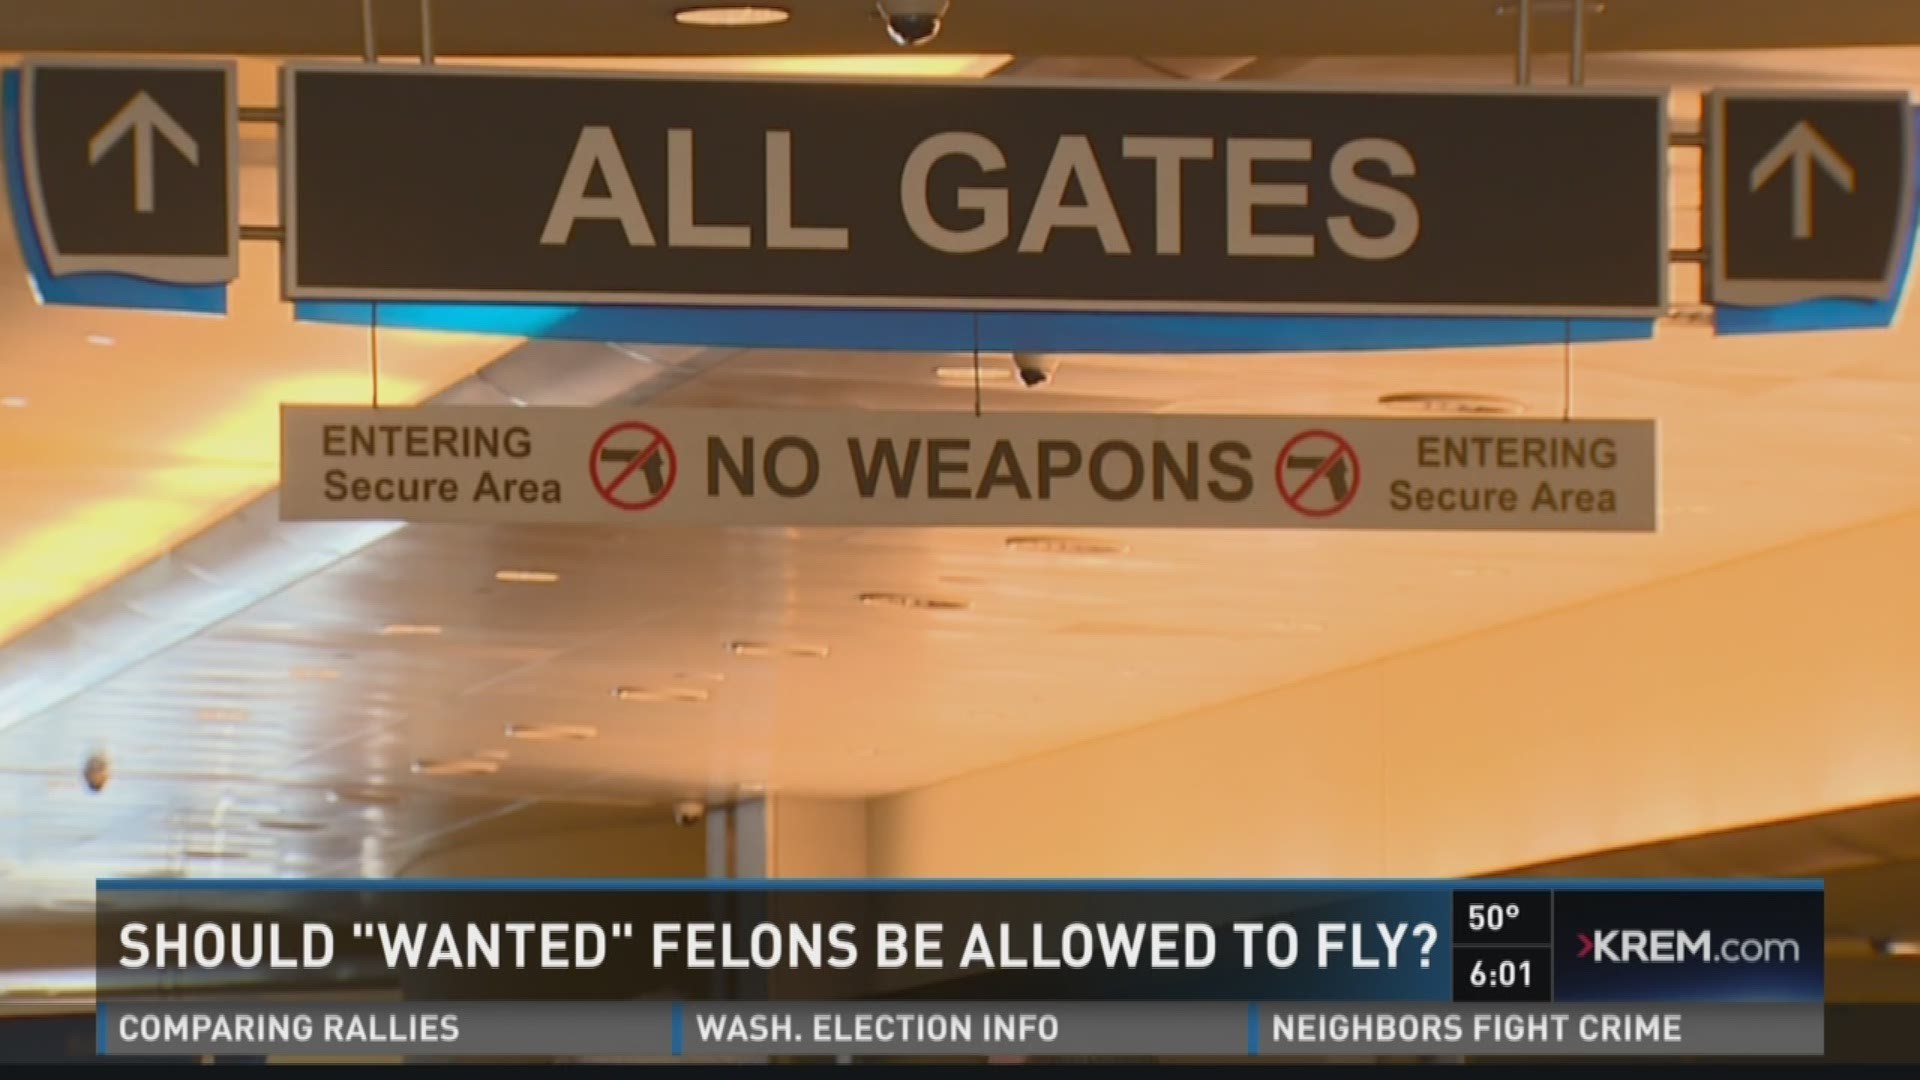 A 2 On Your investigation revealed a loophole allowing wanted felons to fly freely on planes.